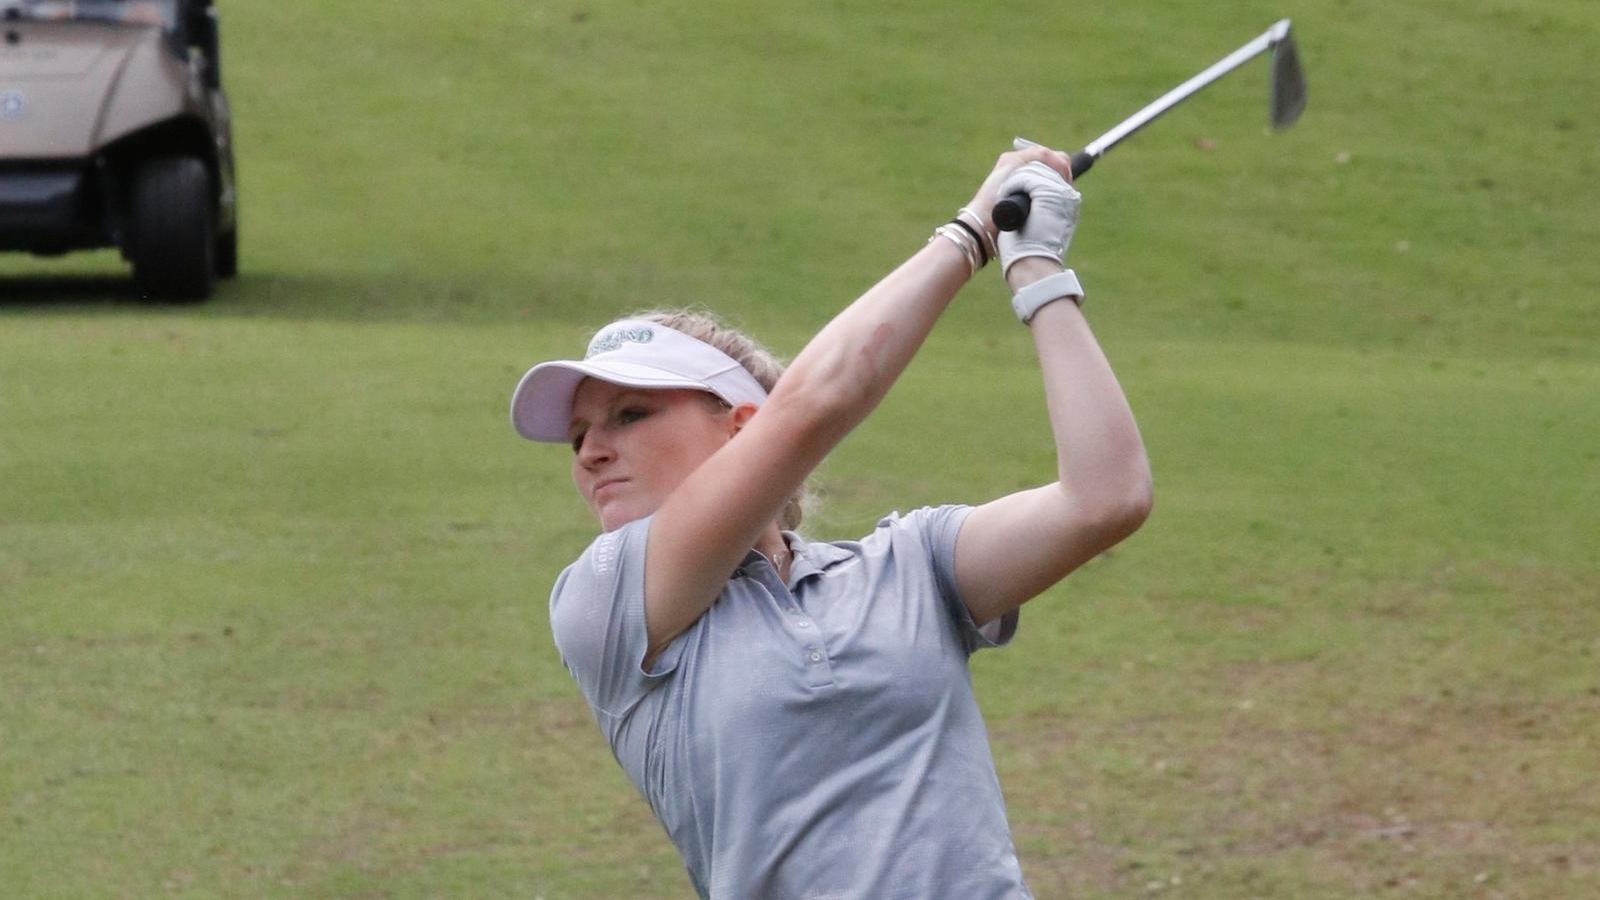 Cleveland State Women’s Golf 11th after Day 1 of Rocket Classic